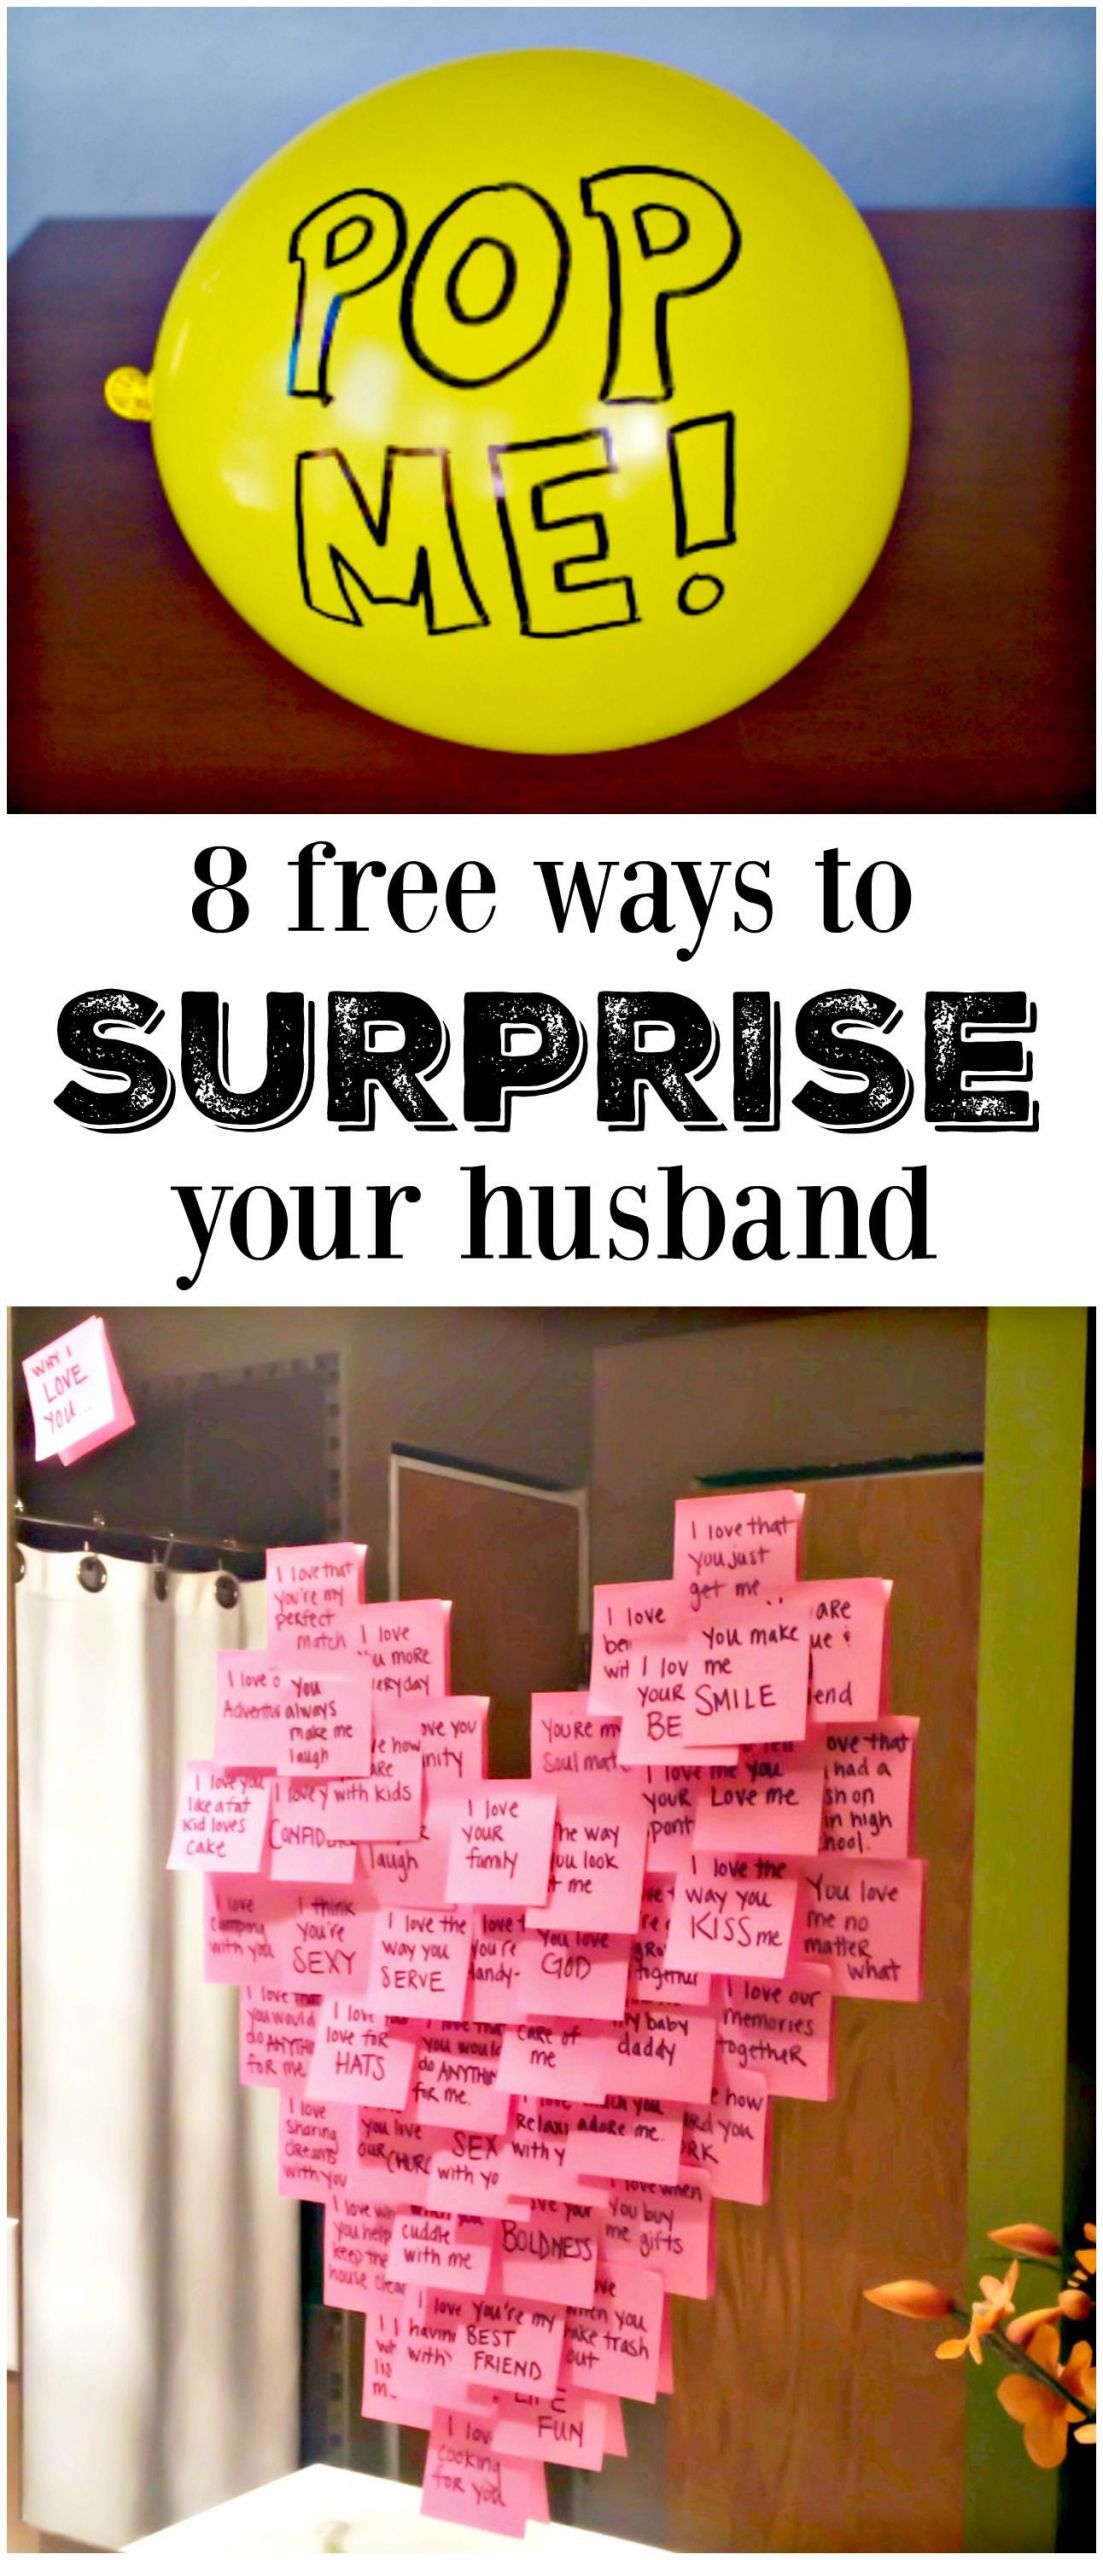 Valentines Gift Ideas For Husbands
 8 Meaningful Ways to Make His Day DIY Ideas